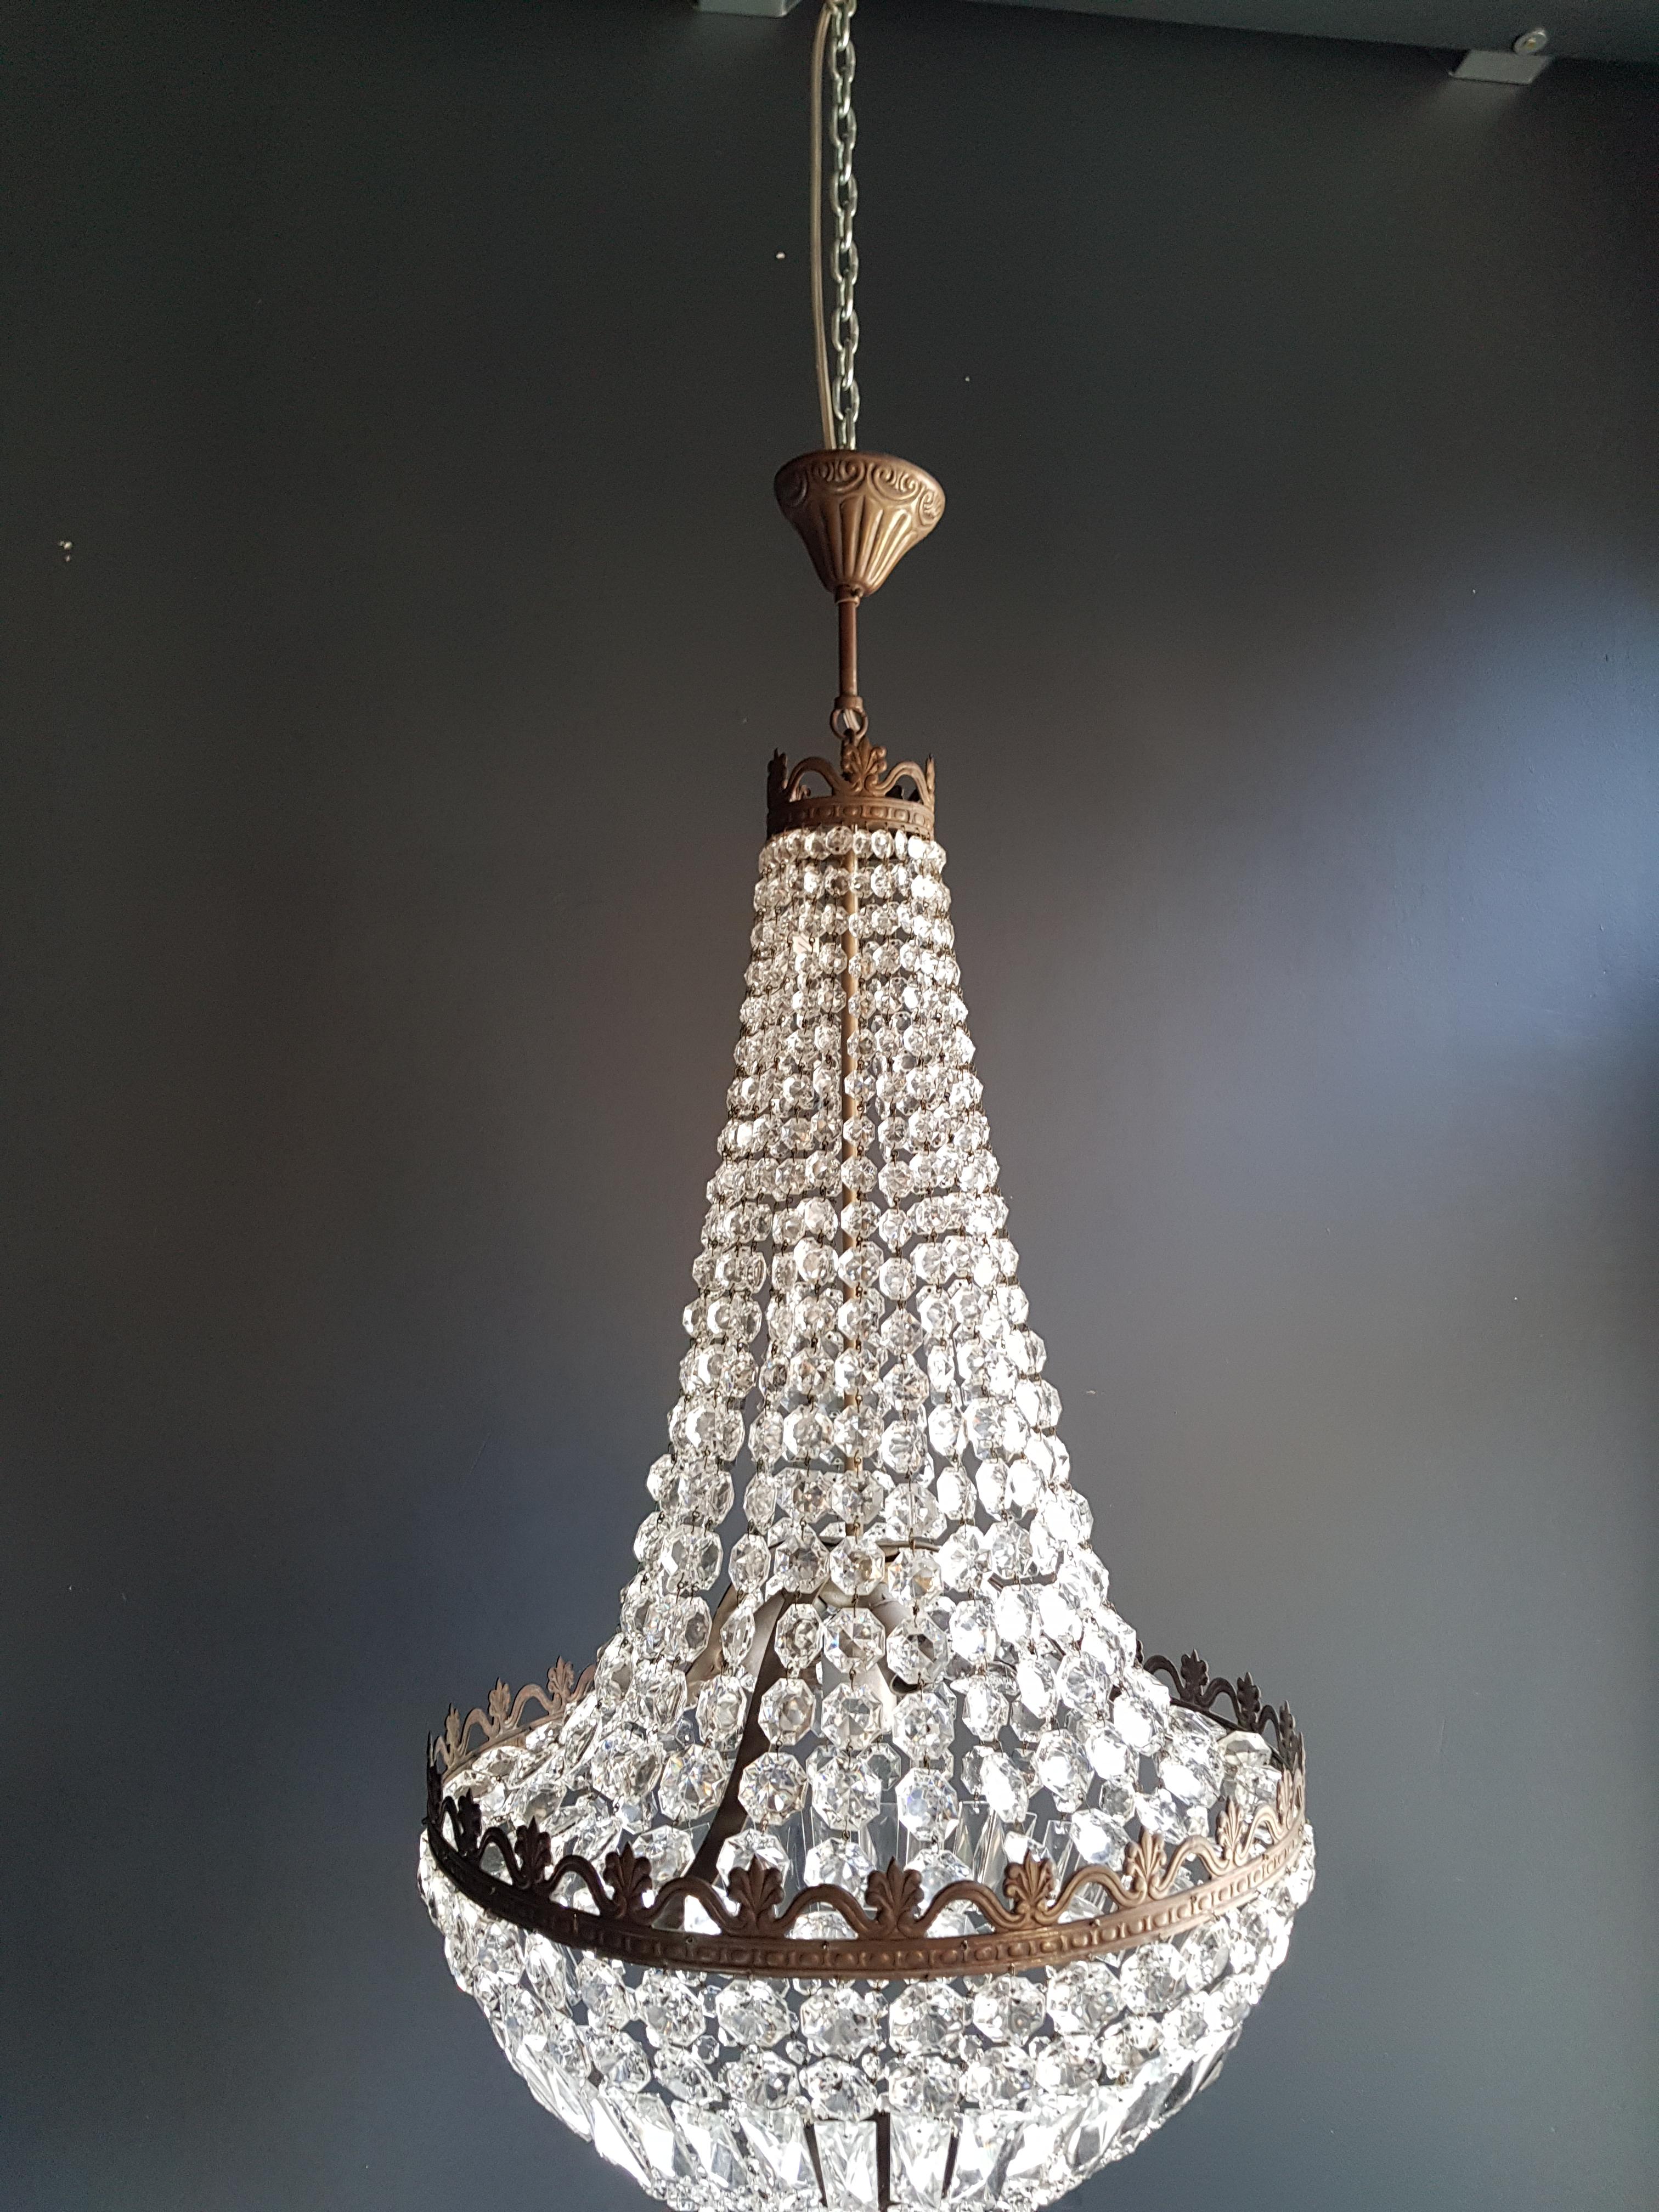 Hand-Knotted Montgolfiè Empire Sac a Pearl Chandelier Crystal Lustre Ceiling Lamp Antique